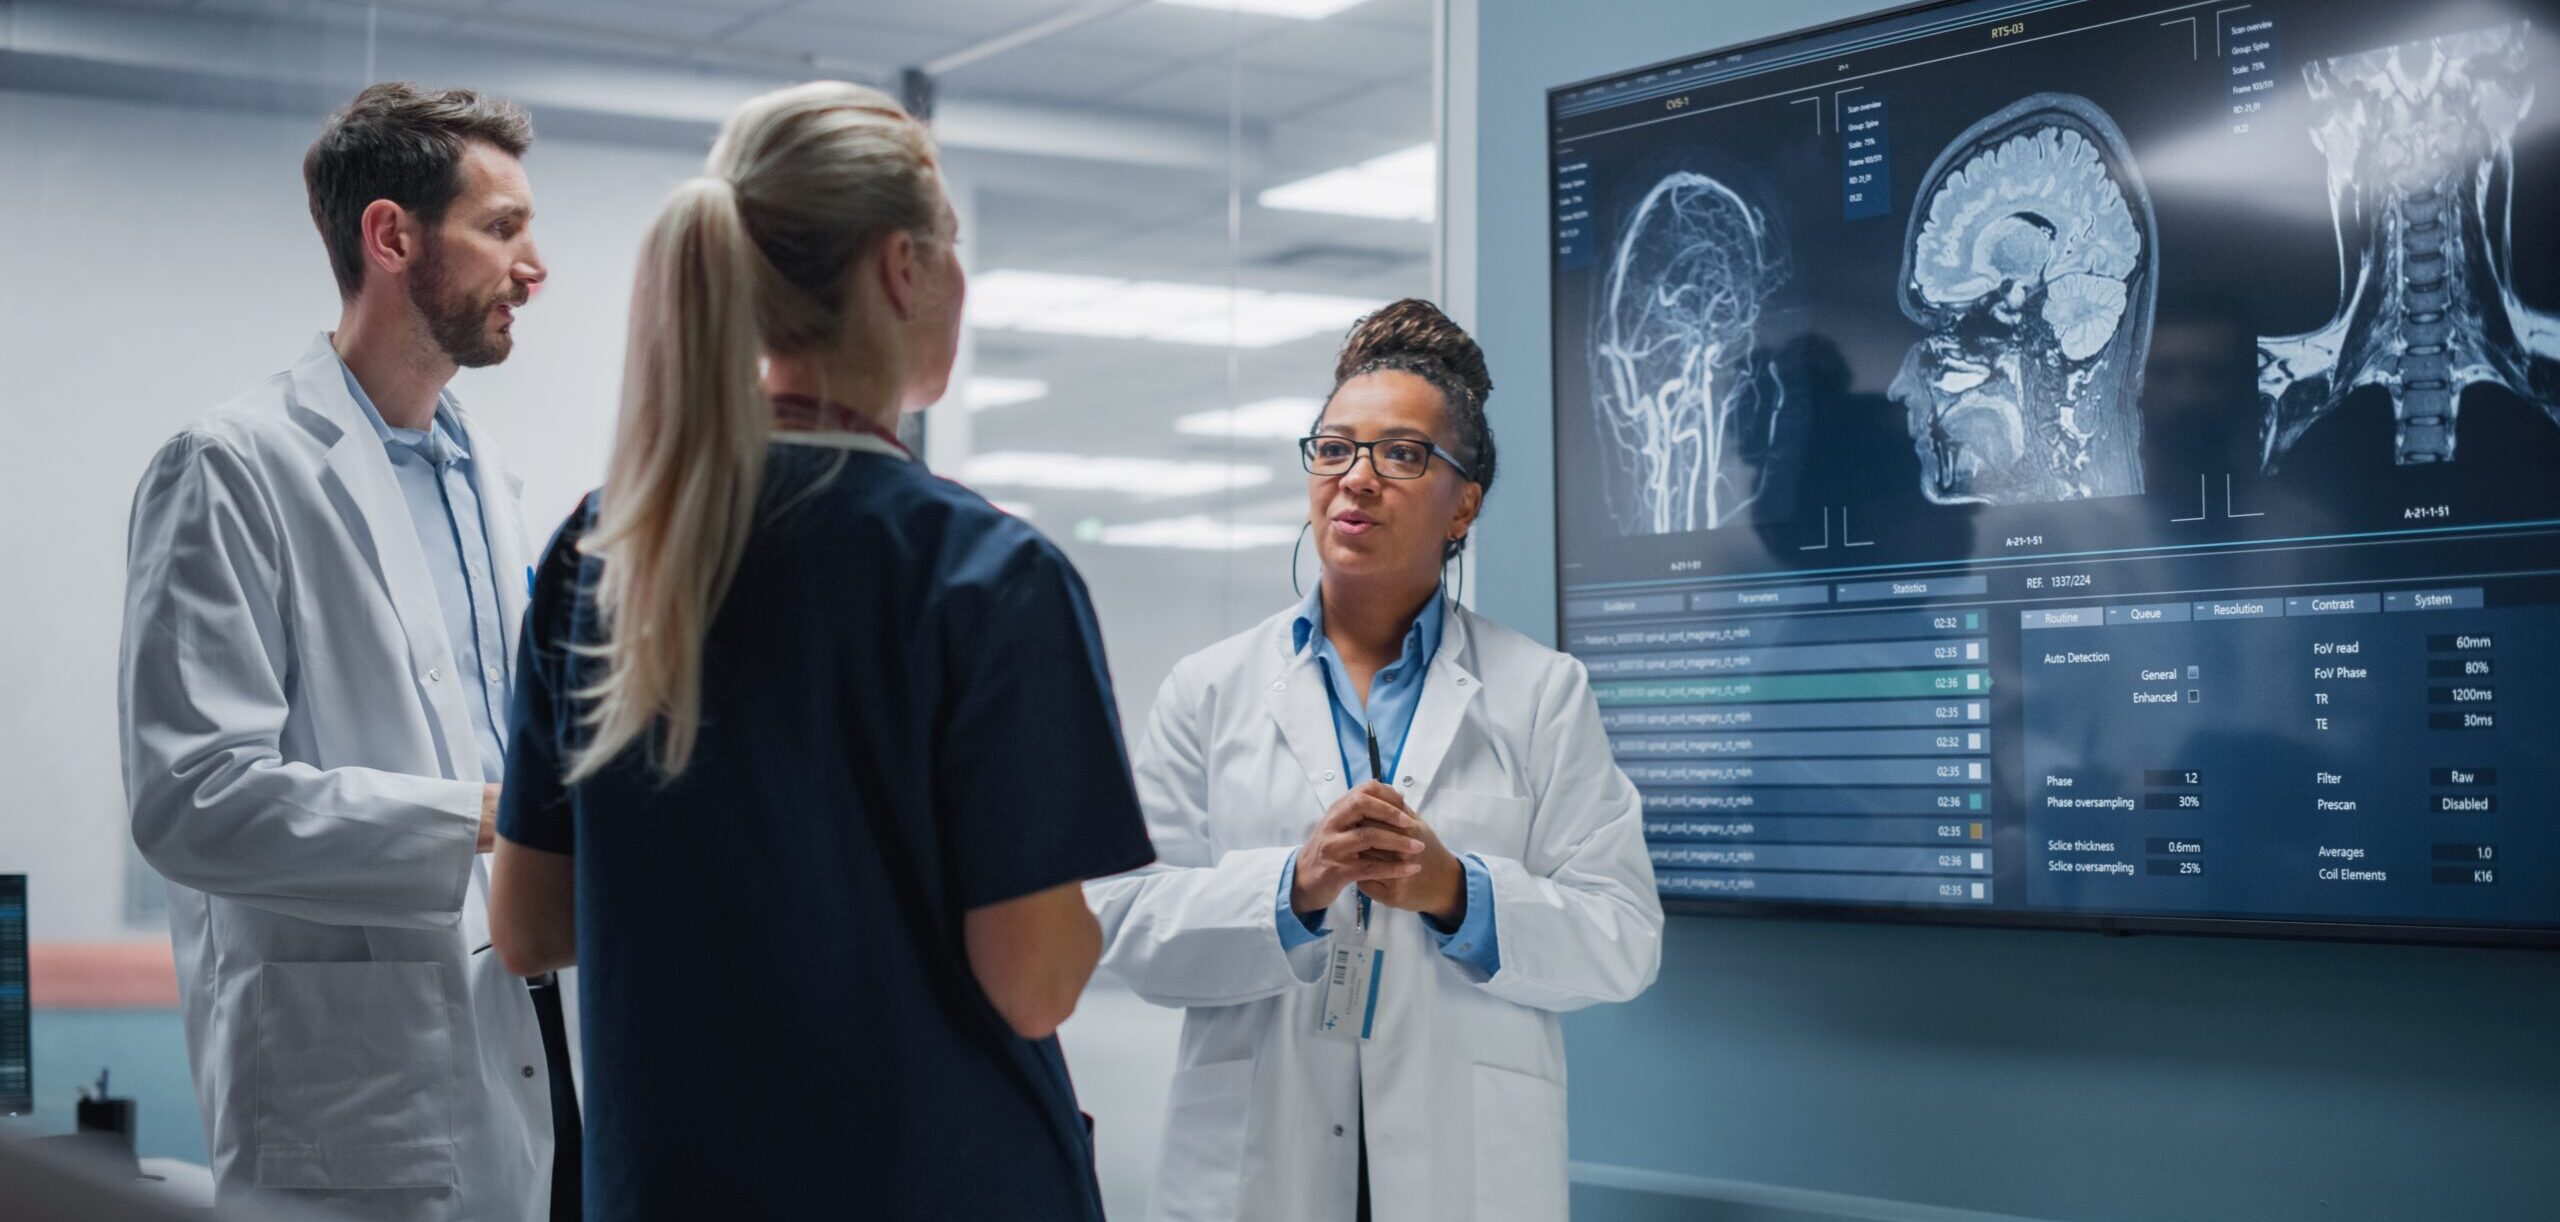 Radiology’s Nonphysician Service Expansion